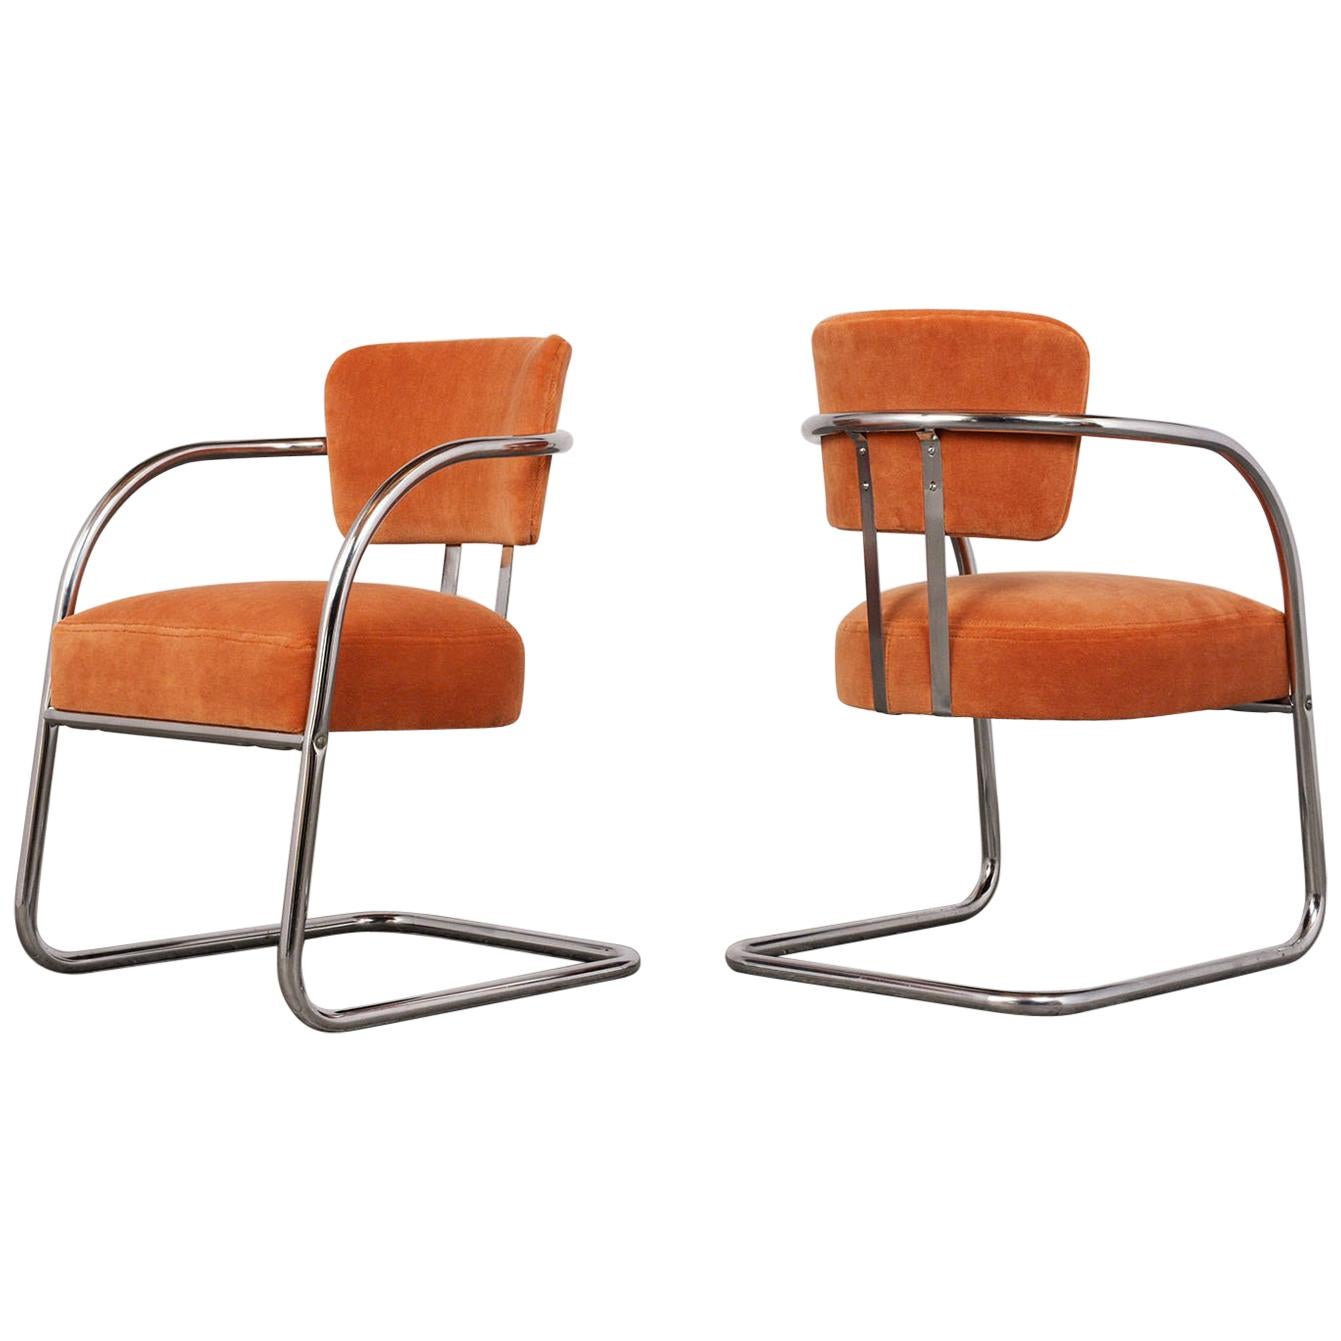 Set of Two Modern Chrome Frame Lounge Chairs